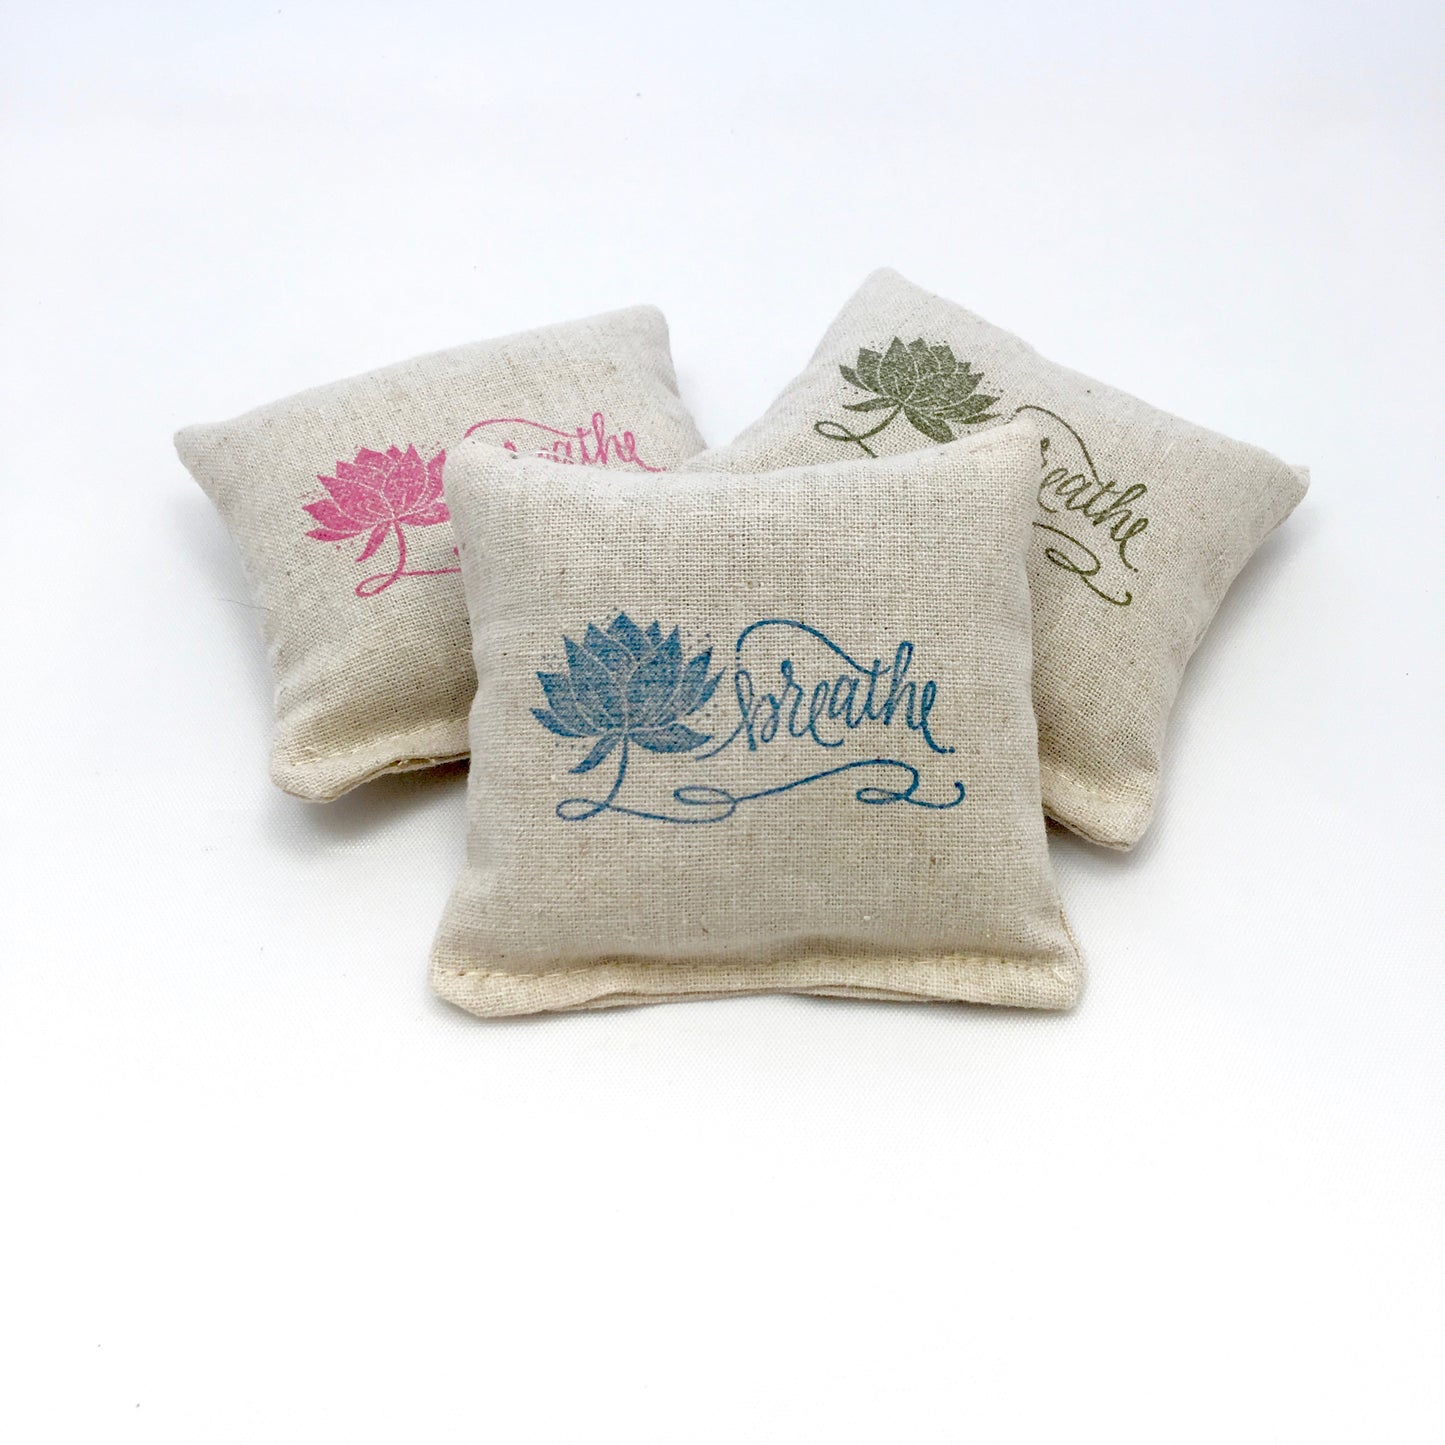 Breathe with Lotus Flower Sachet - Choice of Scent, Ink Color, & Siz